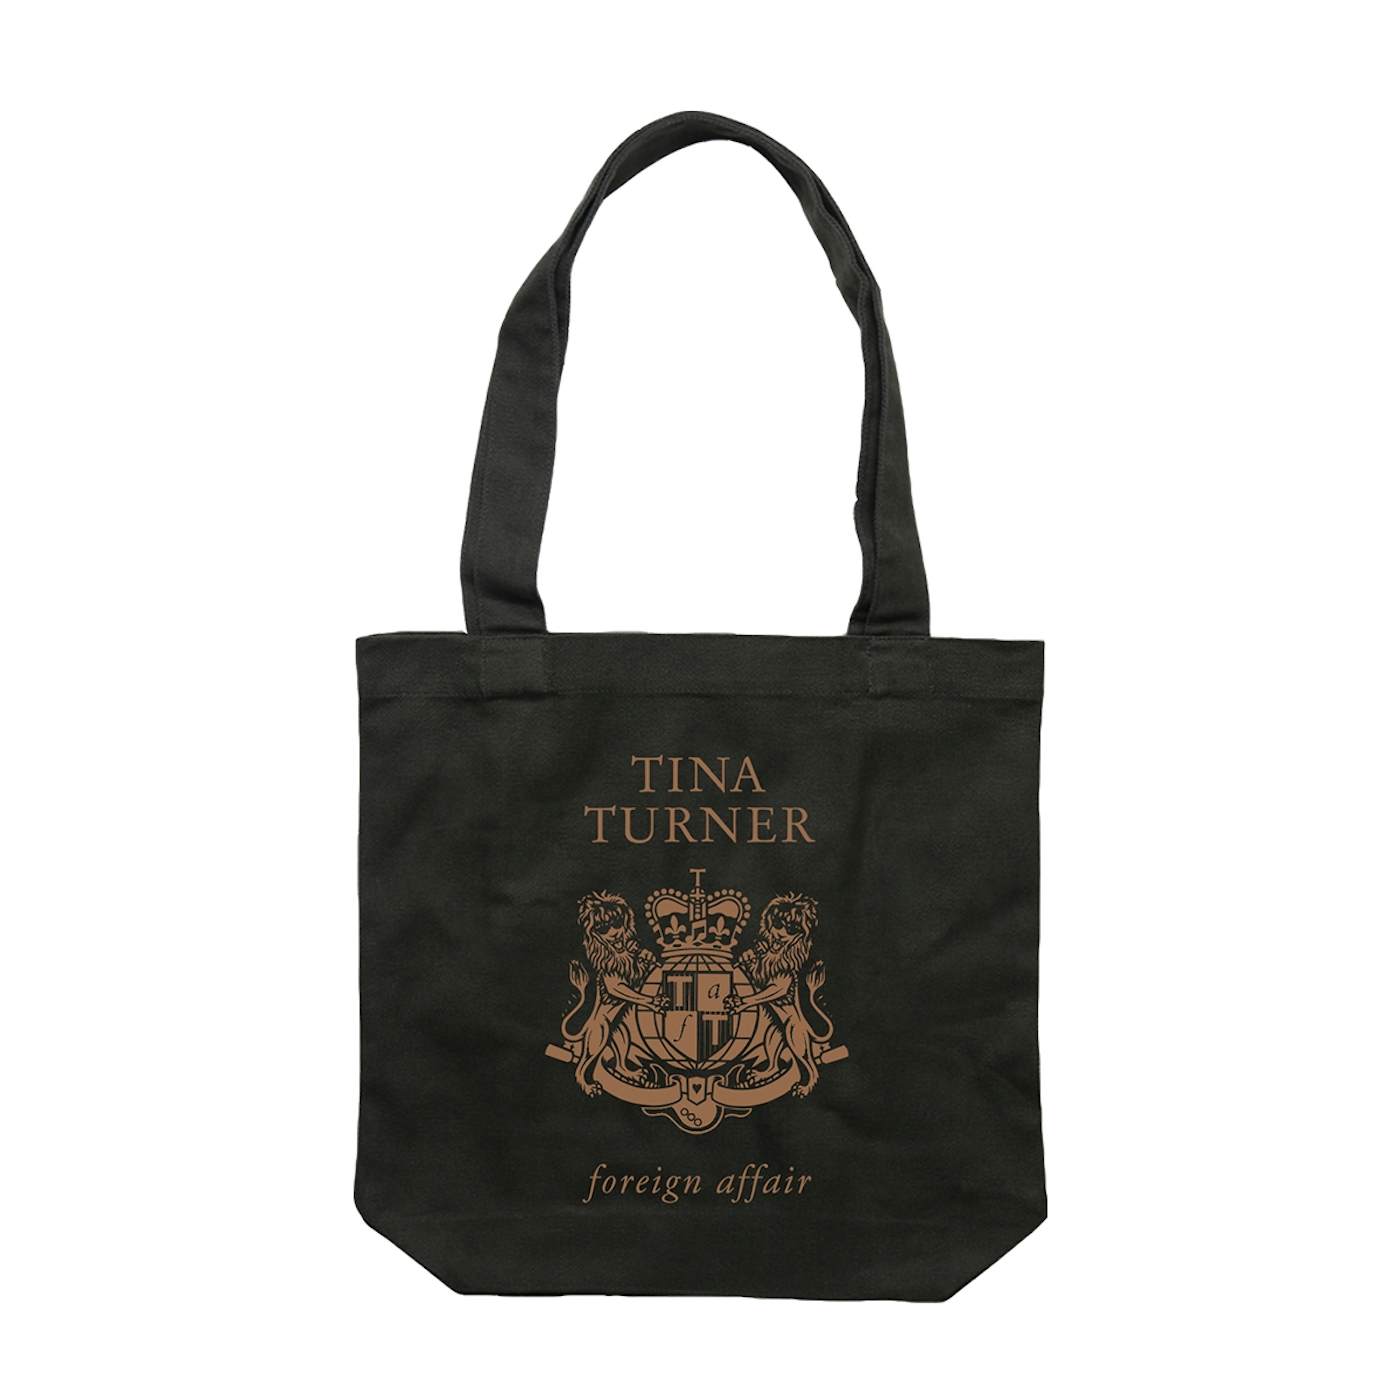 Madonna The Celebration Tour Charity Tote Bag